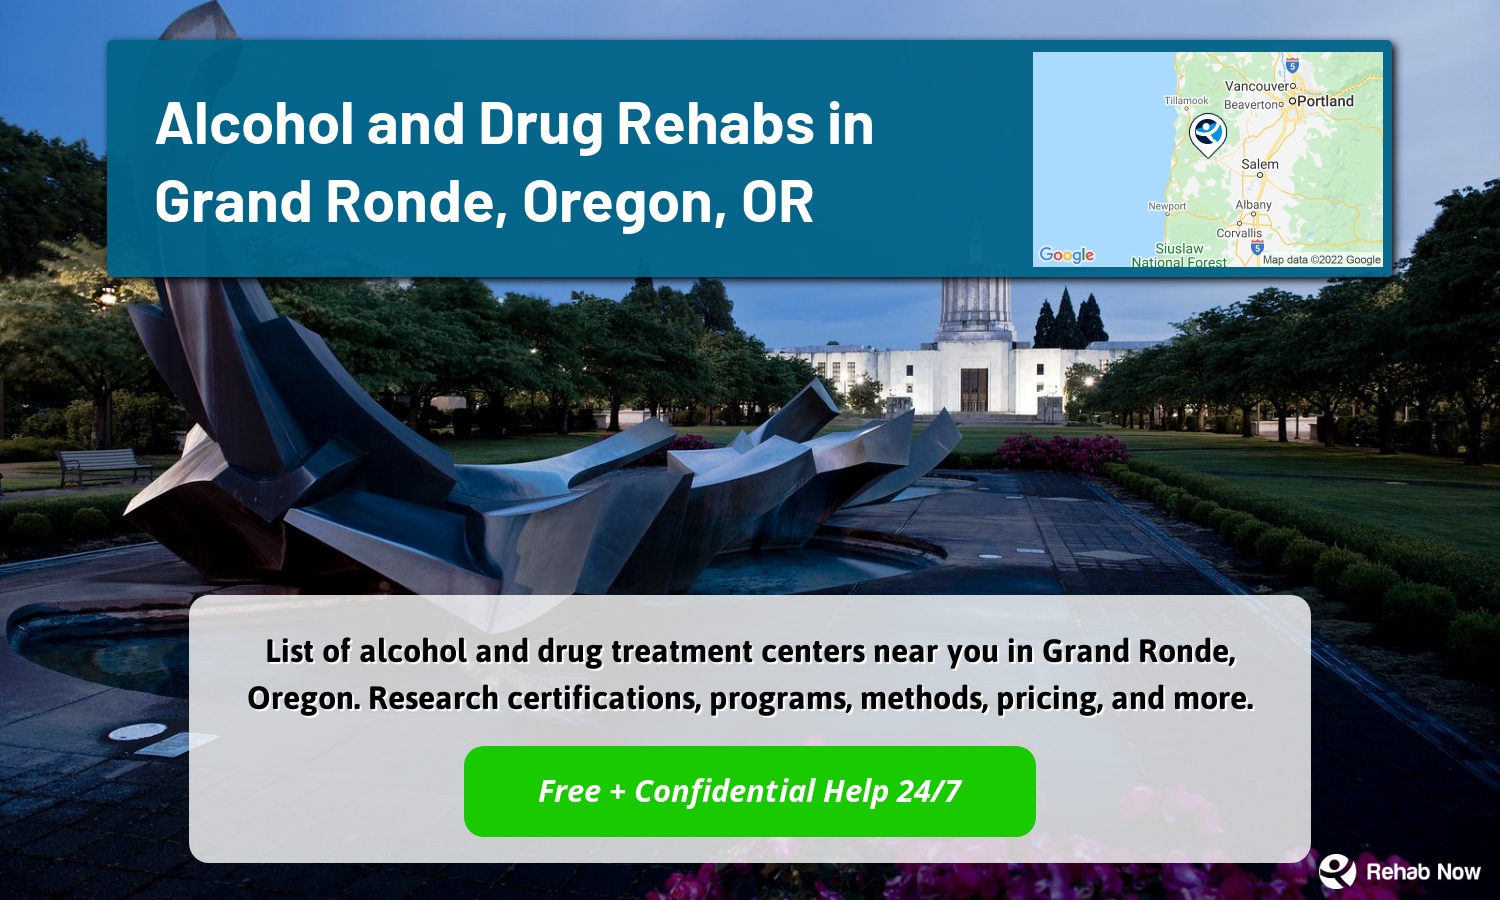 List of alcohol and drug treatment centers near you in Grand Ronde, Oregon. Research certifications, programs, methods, pricing, and more.